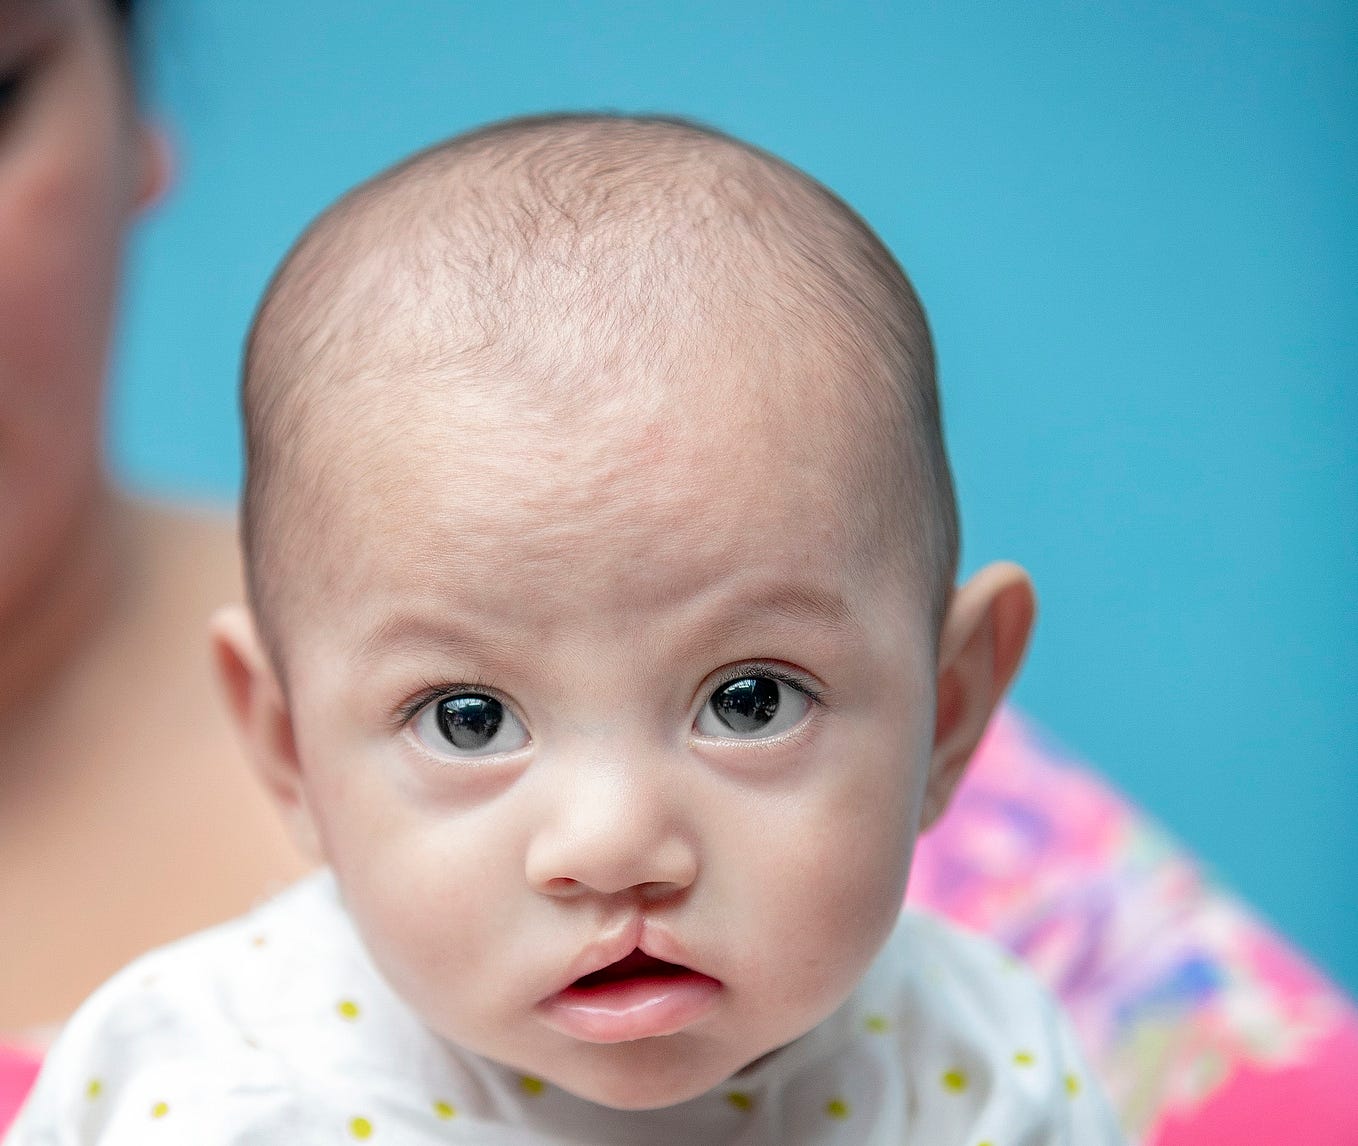 An infant with a cleft lip looks into the camera.